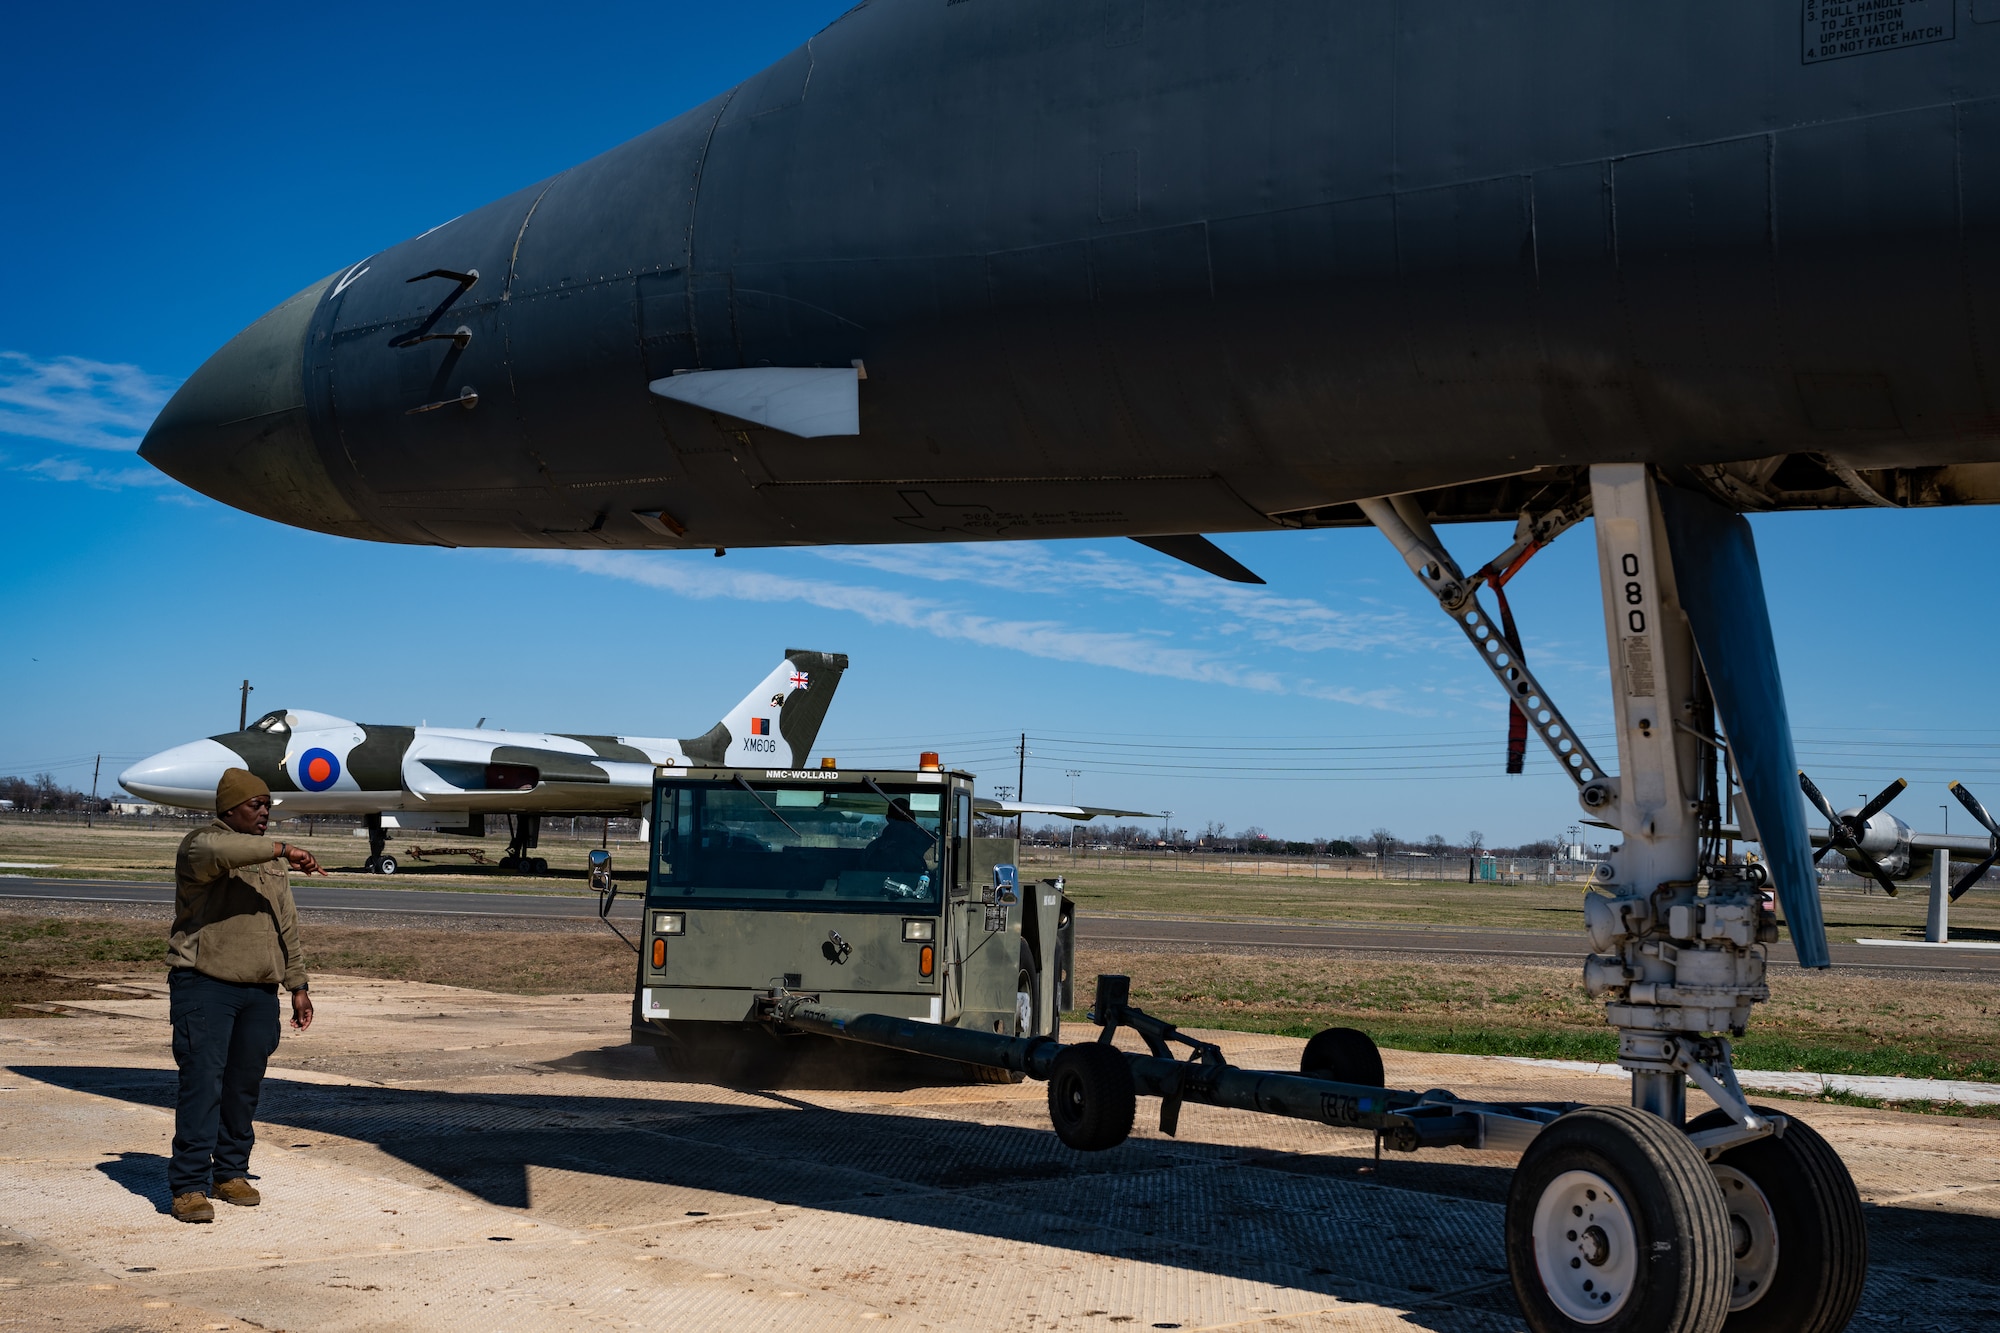 The 76th Expeditionary Depot Maintenance team travelled from Tinker Air Force Base, Oklahoma to help transport the B-1 from the flightline to the museum.